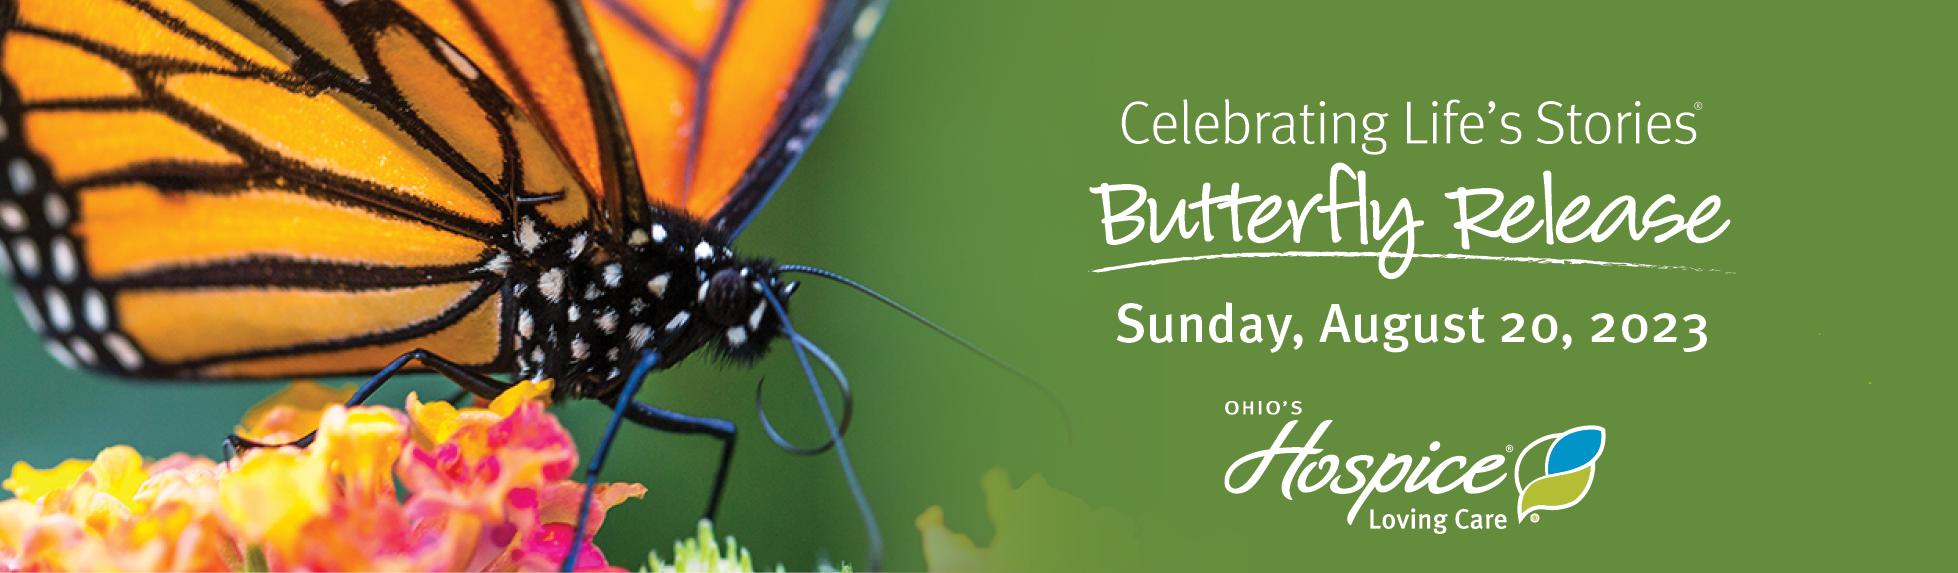 Ohio's Hospice Loving Care Celebrating Life's Stories 2023 Butterfly Release Sunday, August 20, 2023